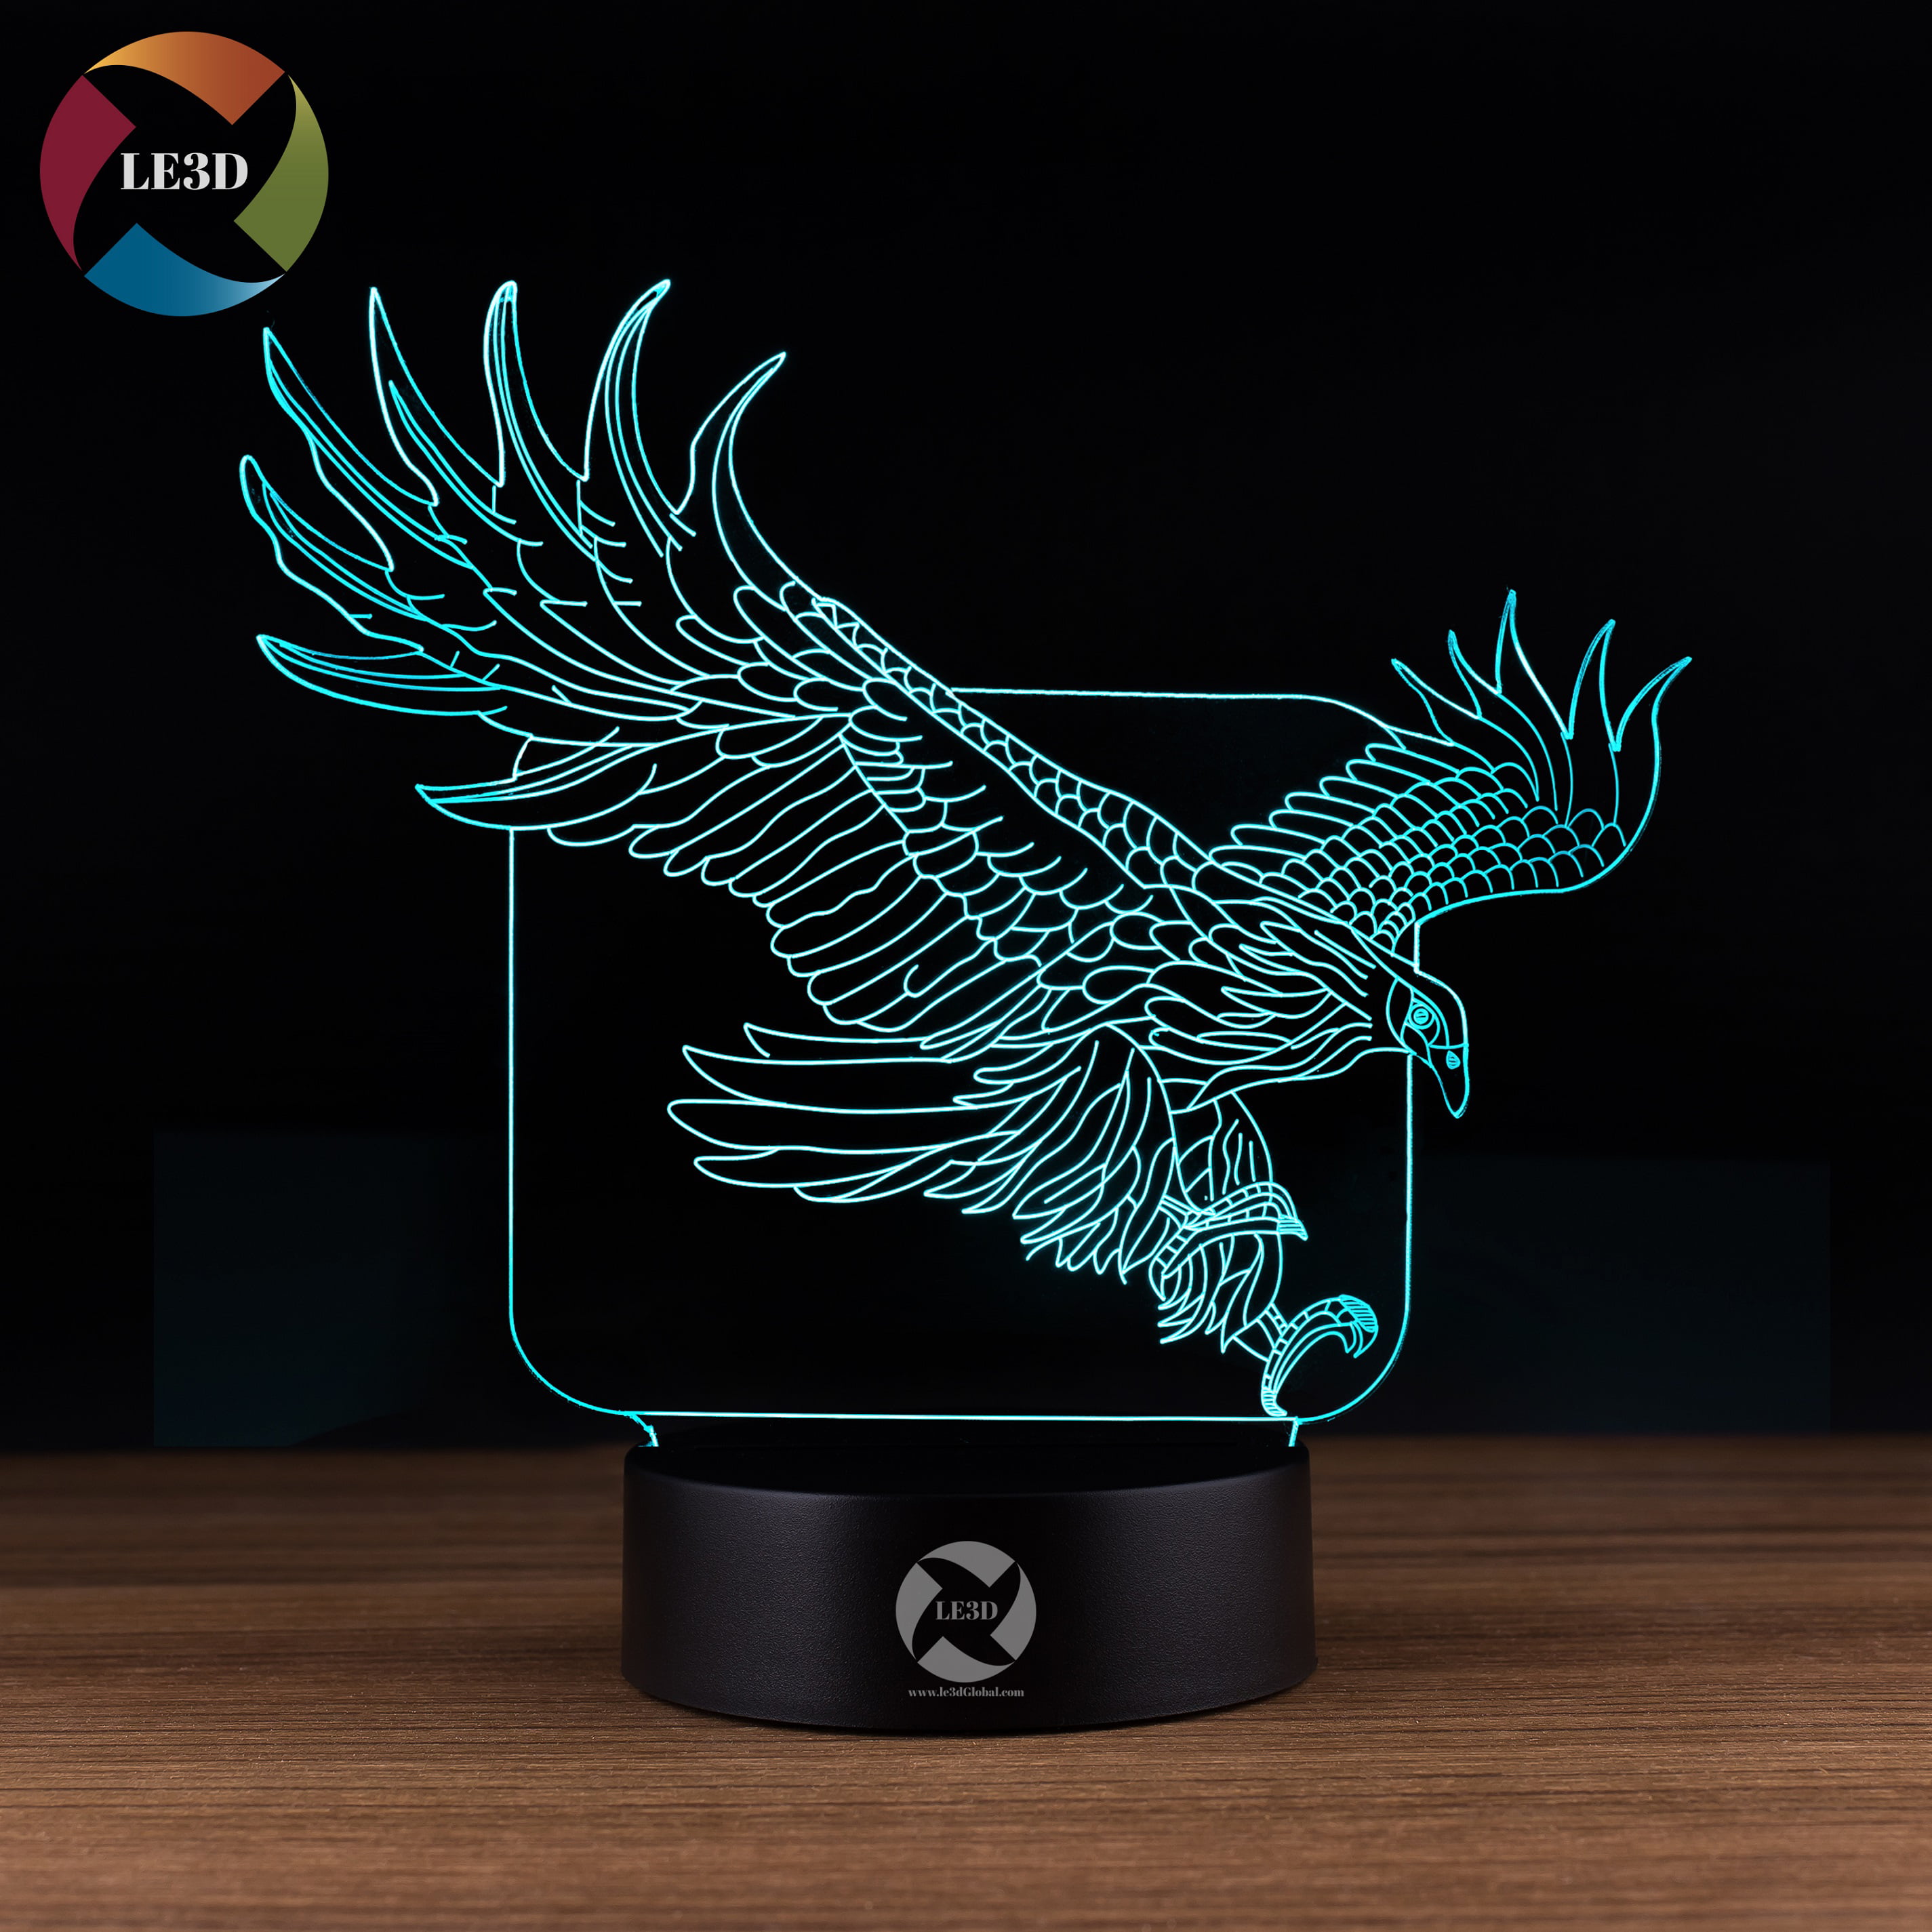 Details about   3D Eagle Led Illusion Led 7 Color Changing USB Touch Night Light Decoration Gift 